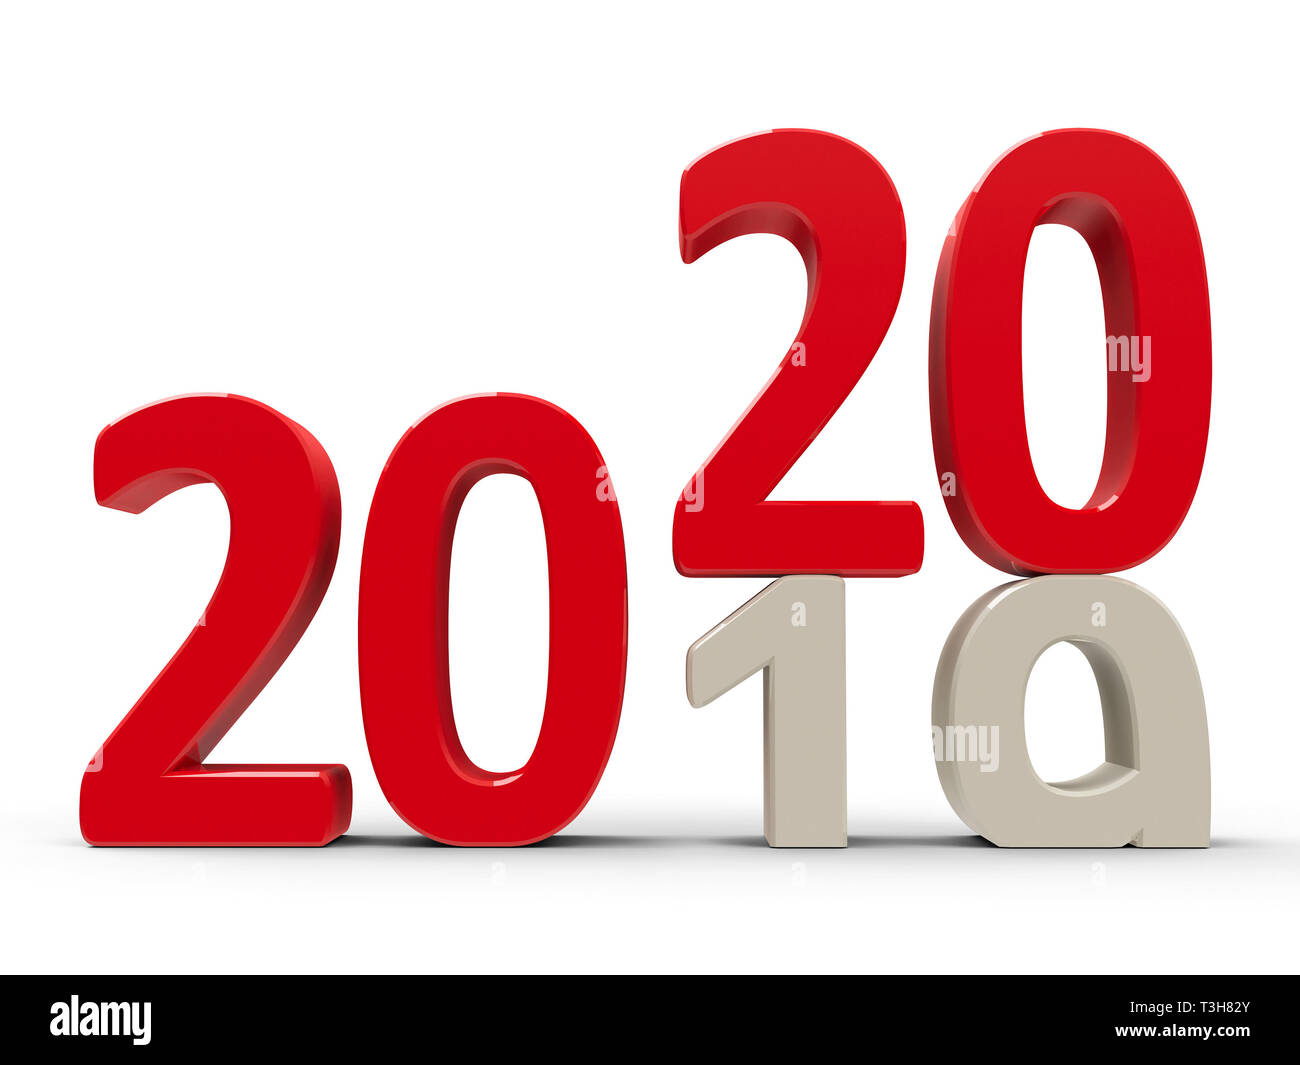 2019-2020 change represents the new year 2020, three-dimensional rendering, 3D illustration Stock Photo